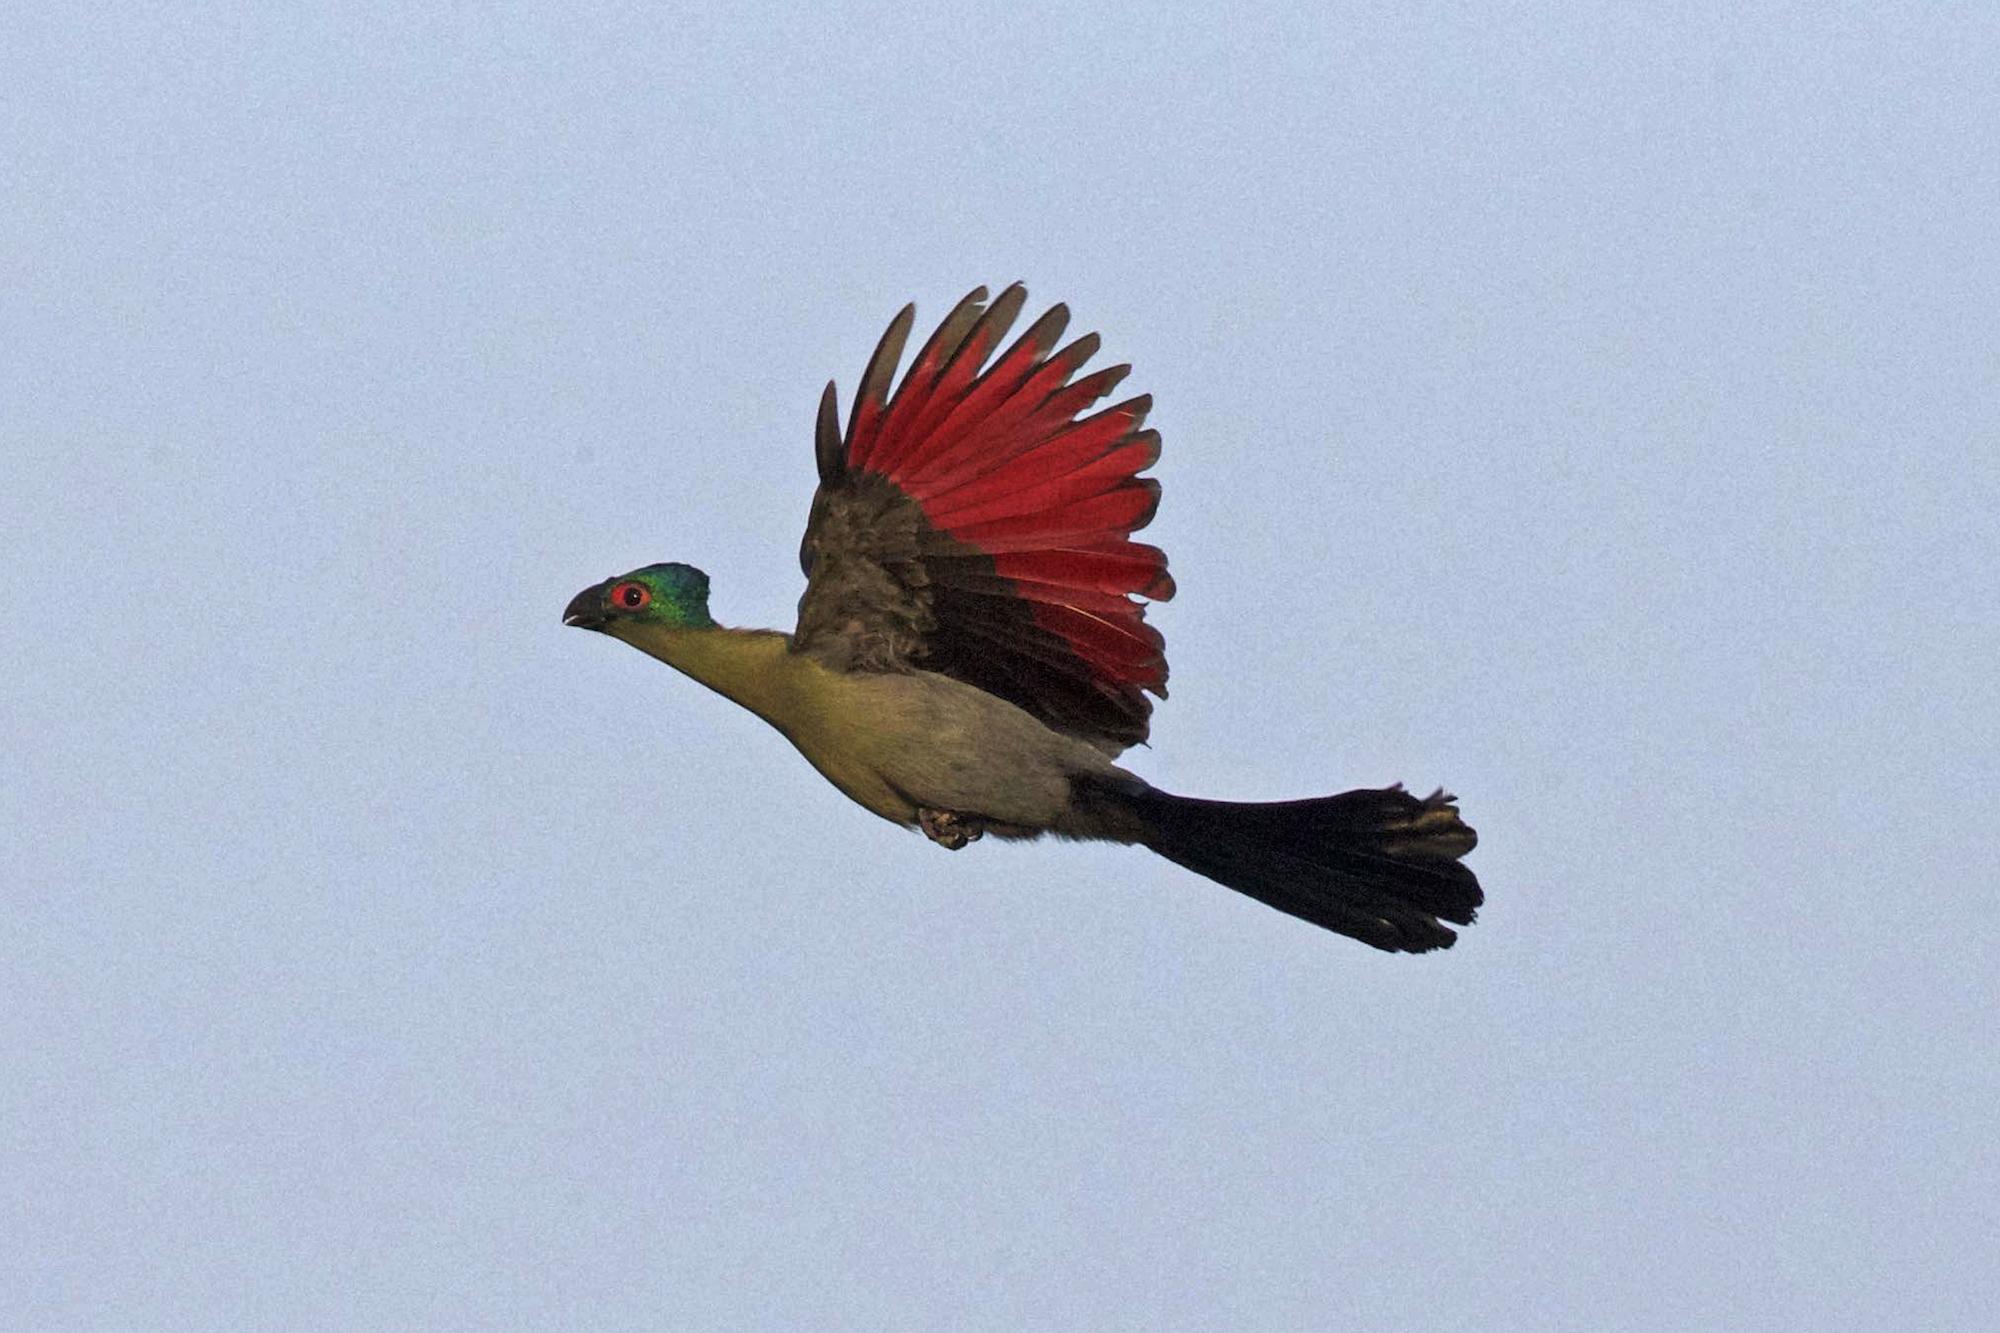 Colorful bird flying